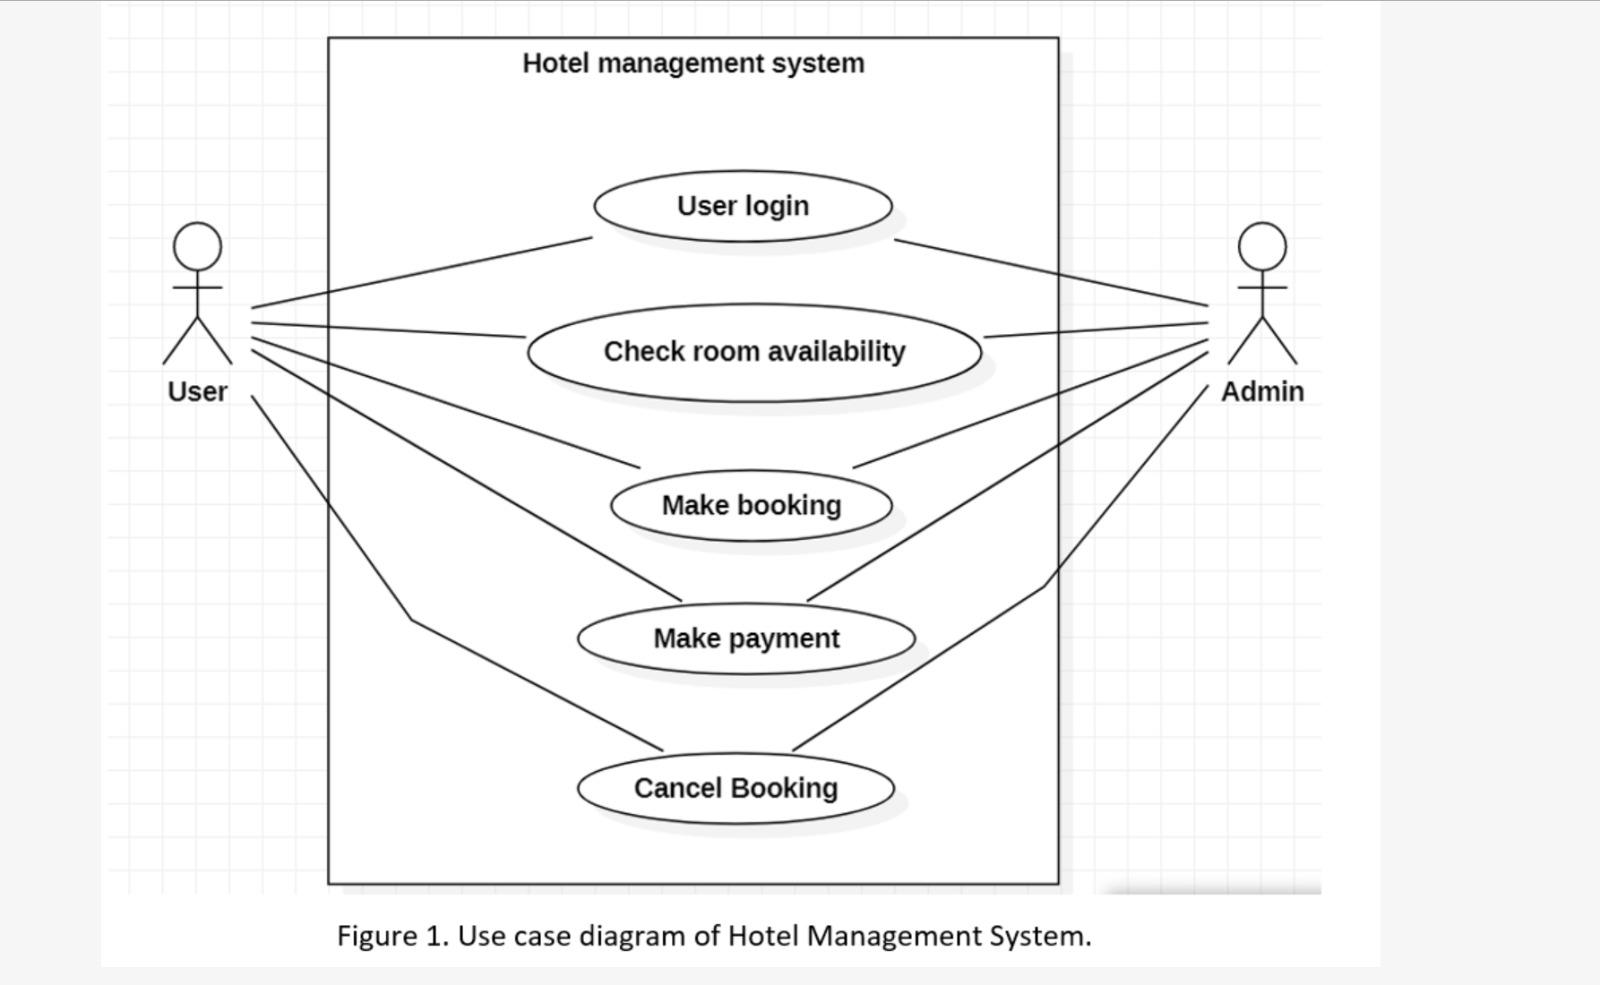 User Hotel management system User login Check room availability Make booking Make payment Cancel Booking